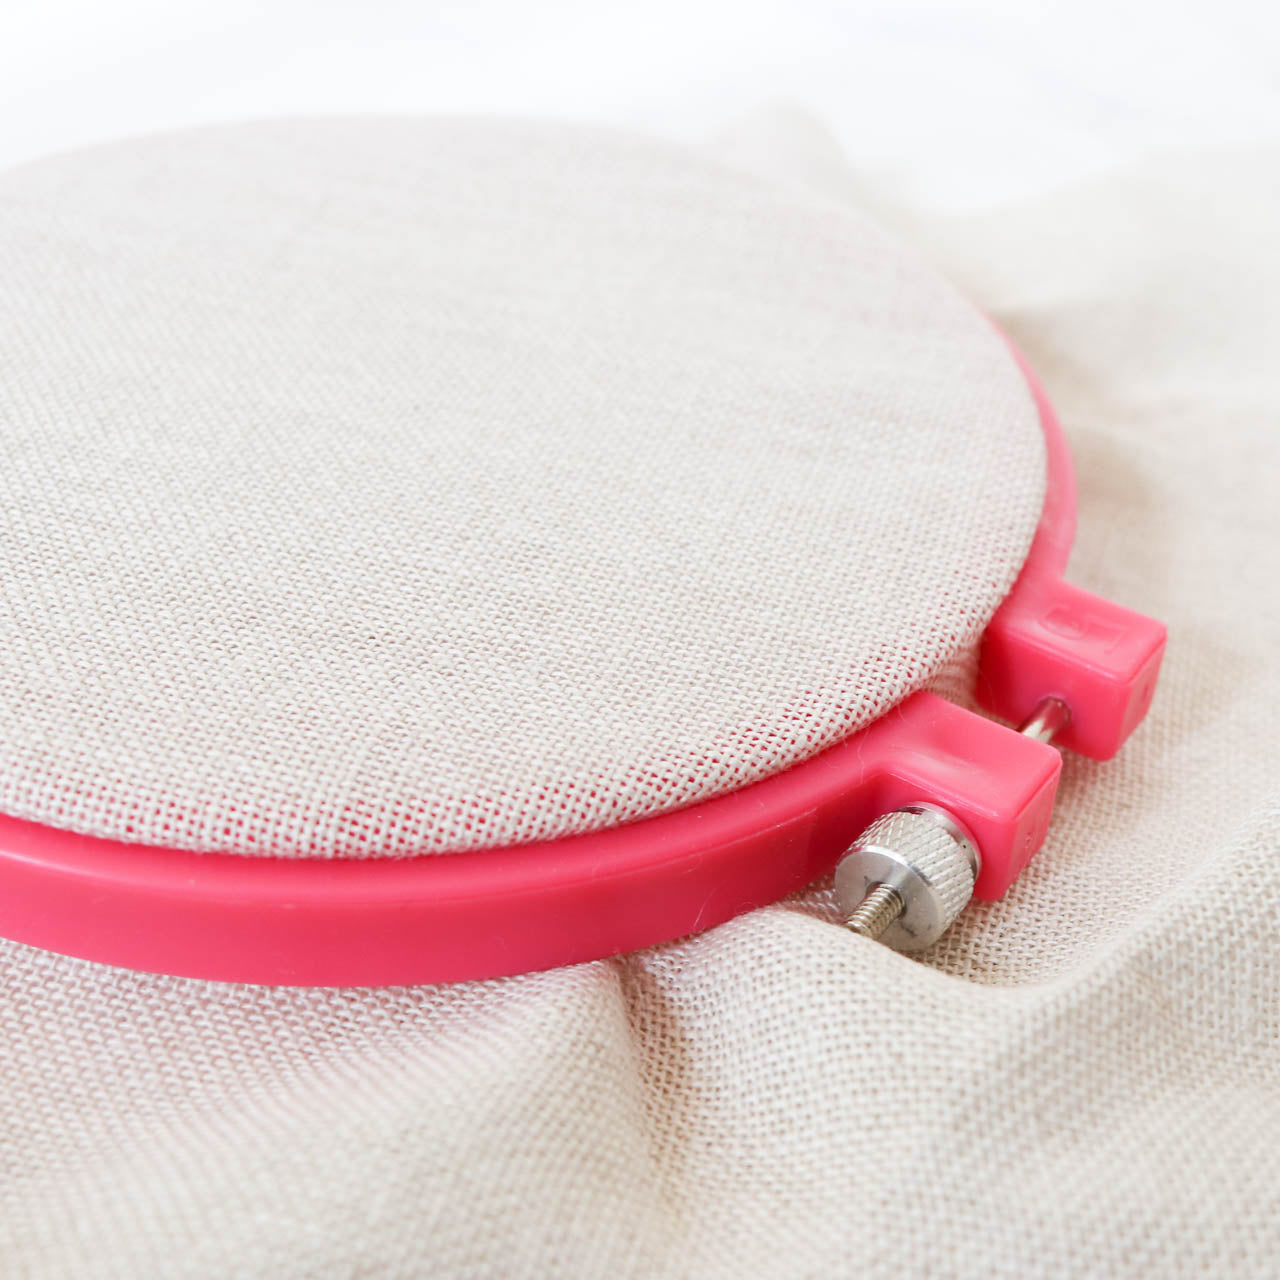 Super Grip Plastic Embroidery Hoop - Stitched Modern